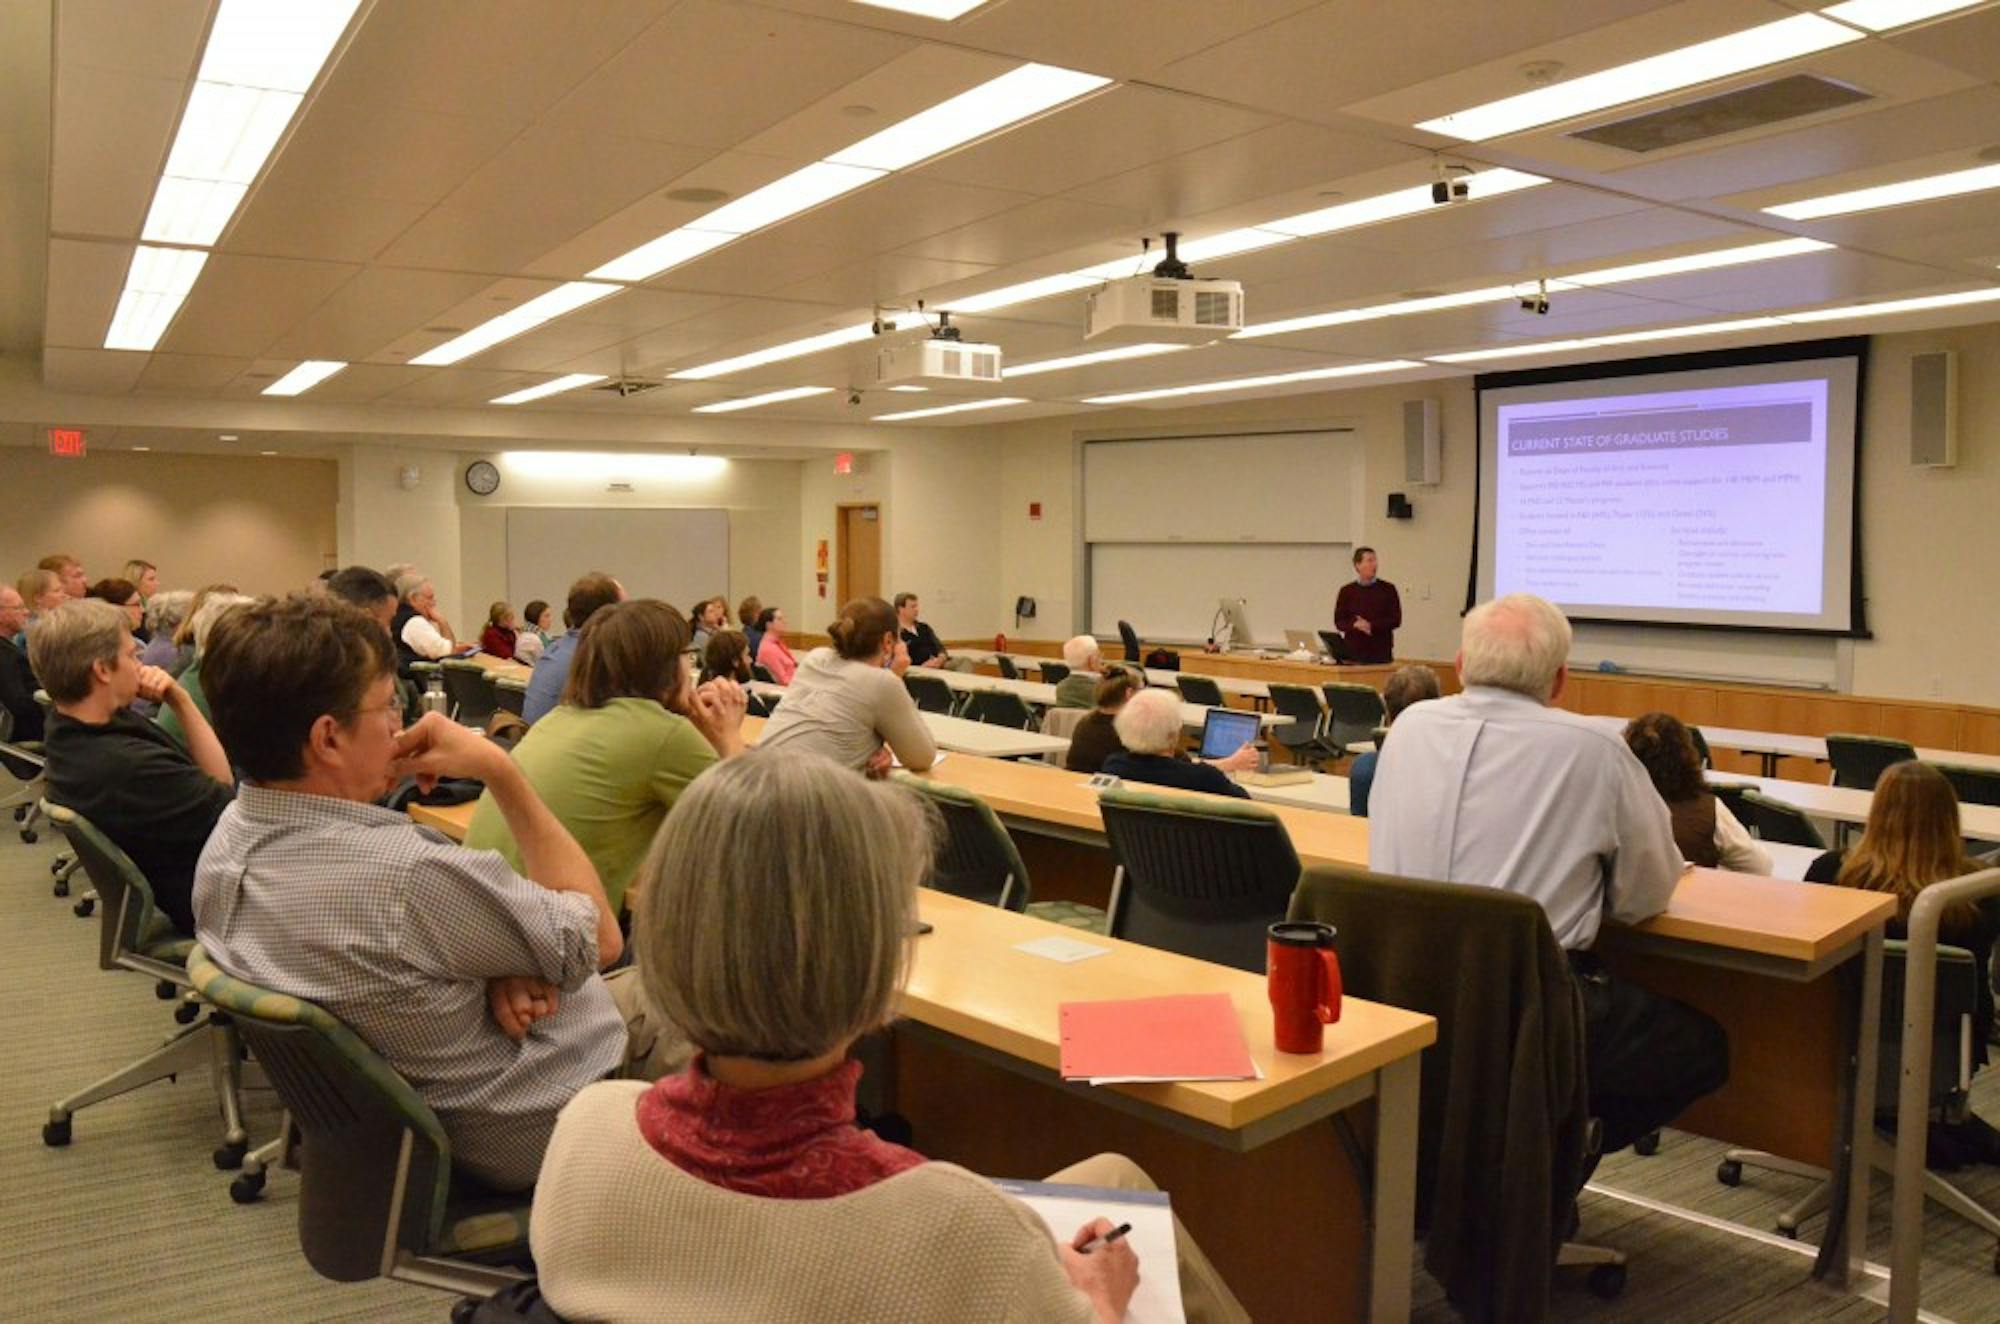 Dean of graduate studies Jon Kull gave a presentation on the proposal for an independent graduate school.